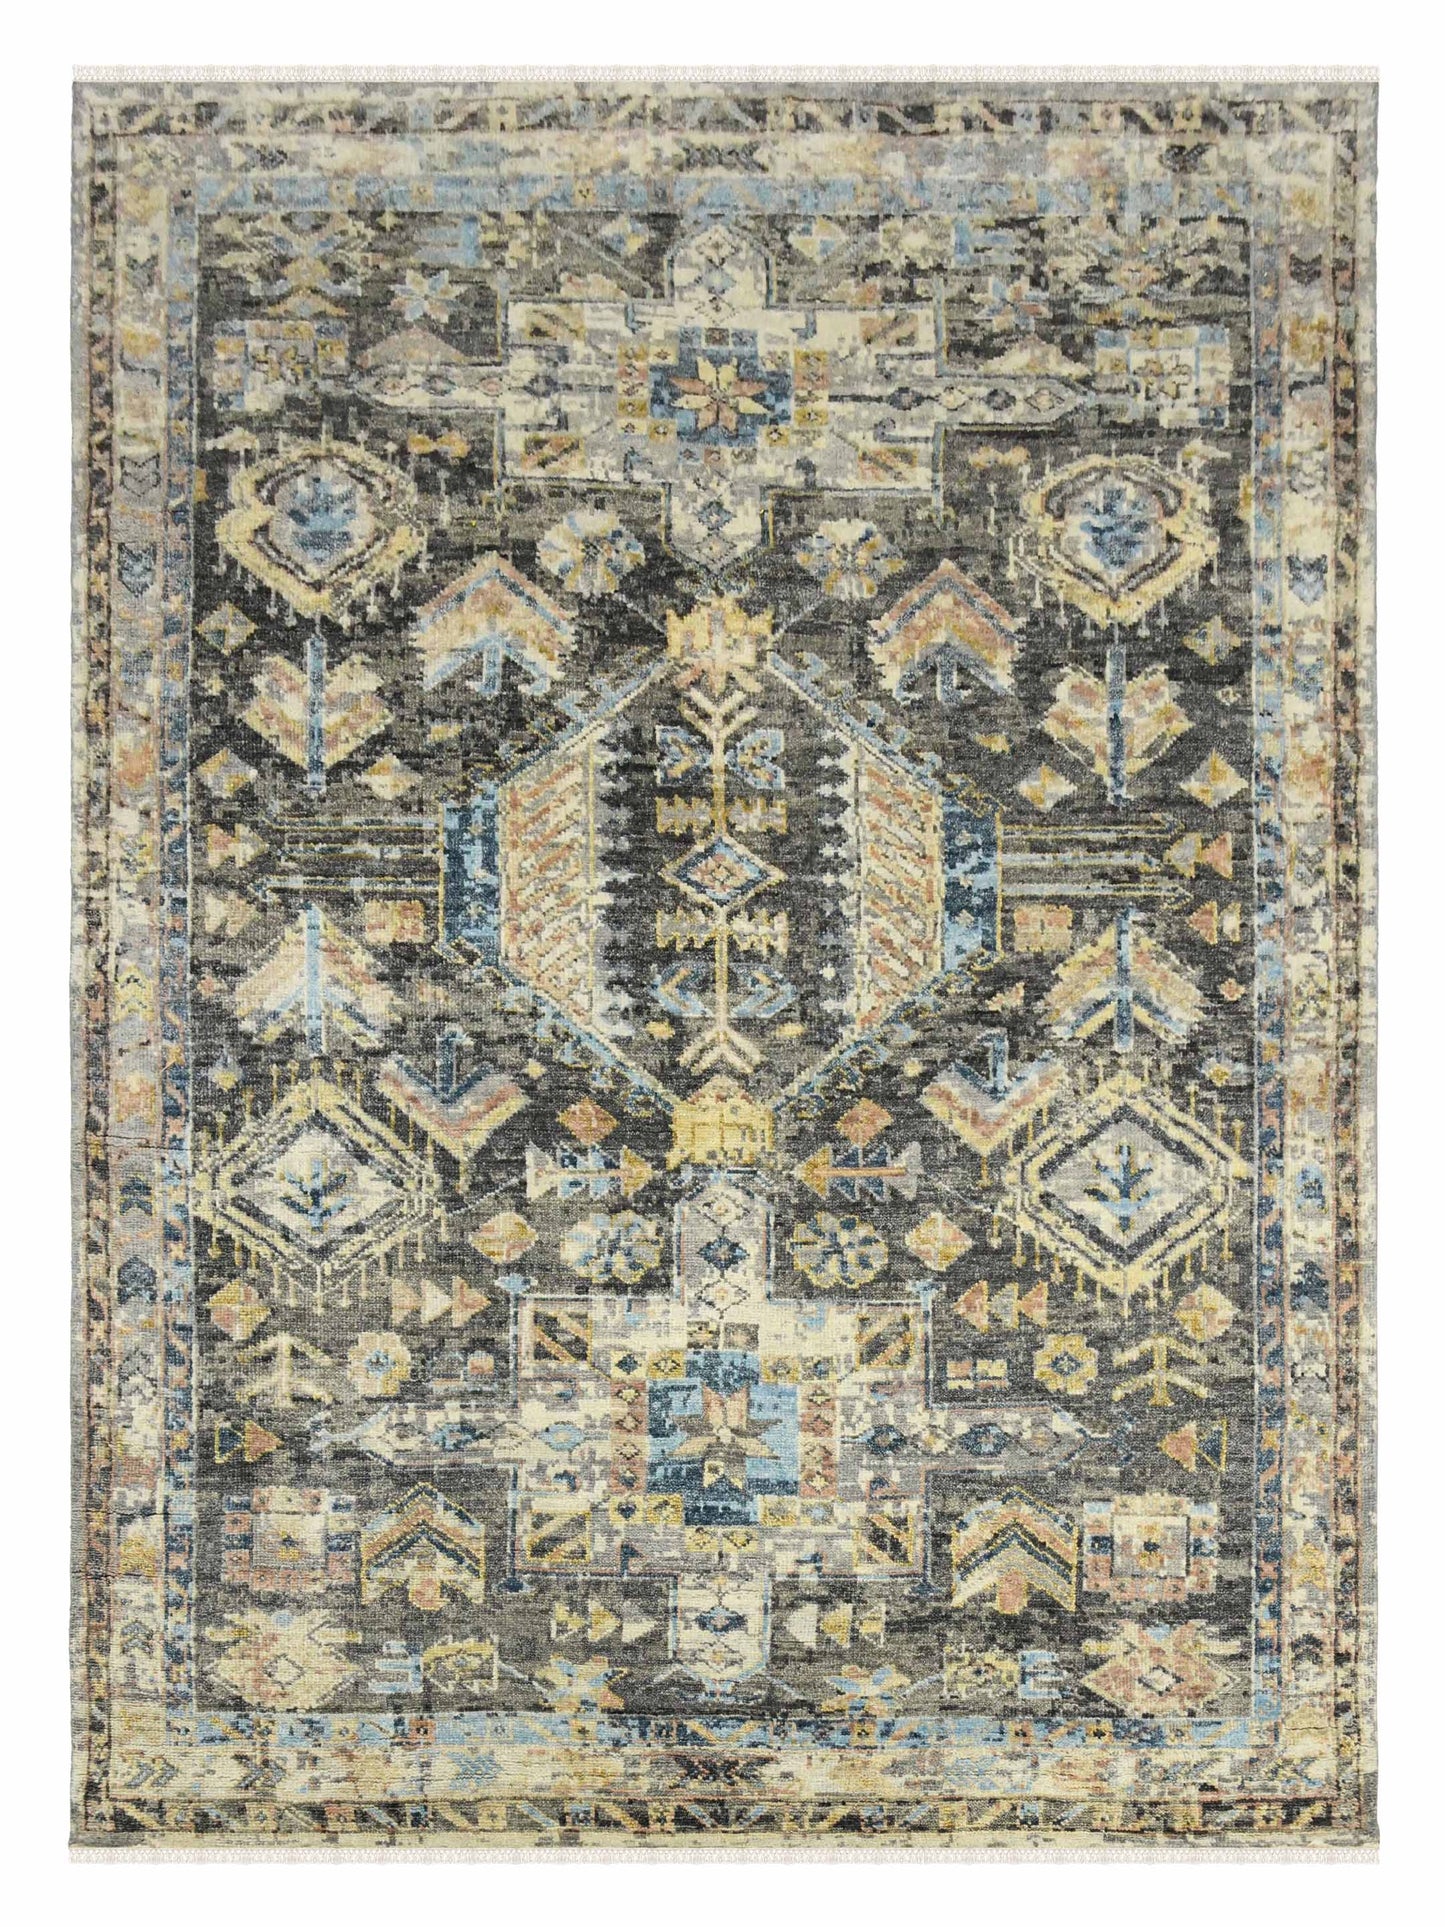 Limited Woodburn WOD-553 GRAY Traditional Knotted Rug